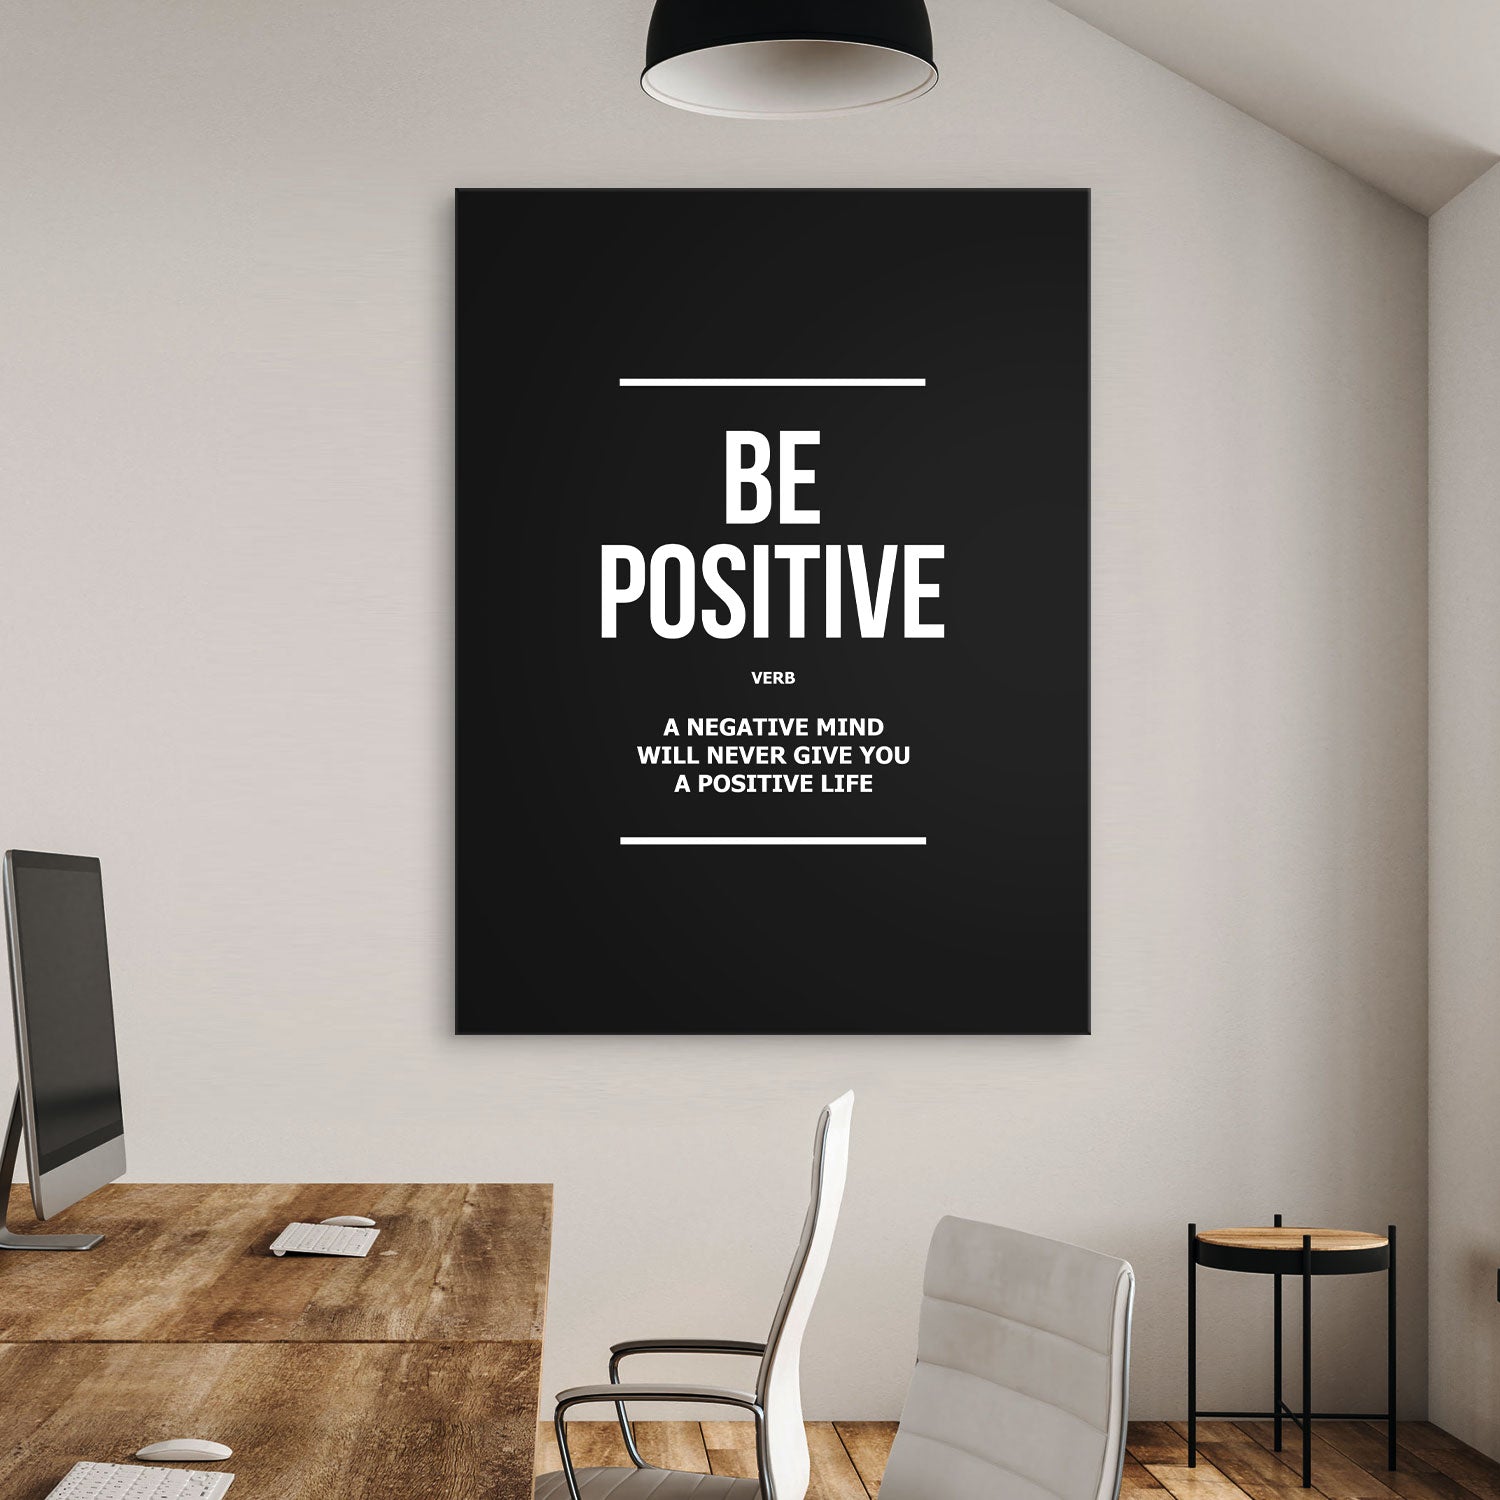 Be Positive Verb